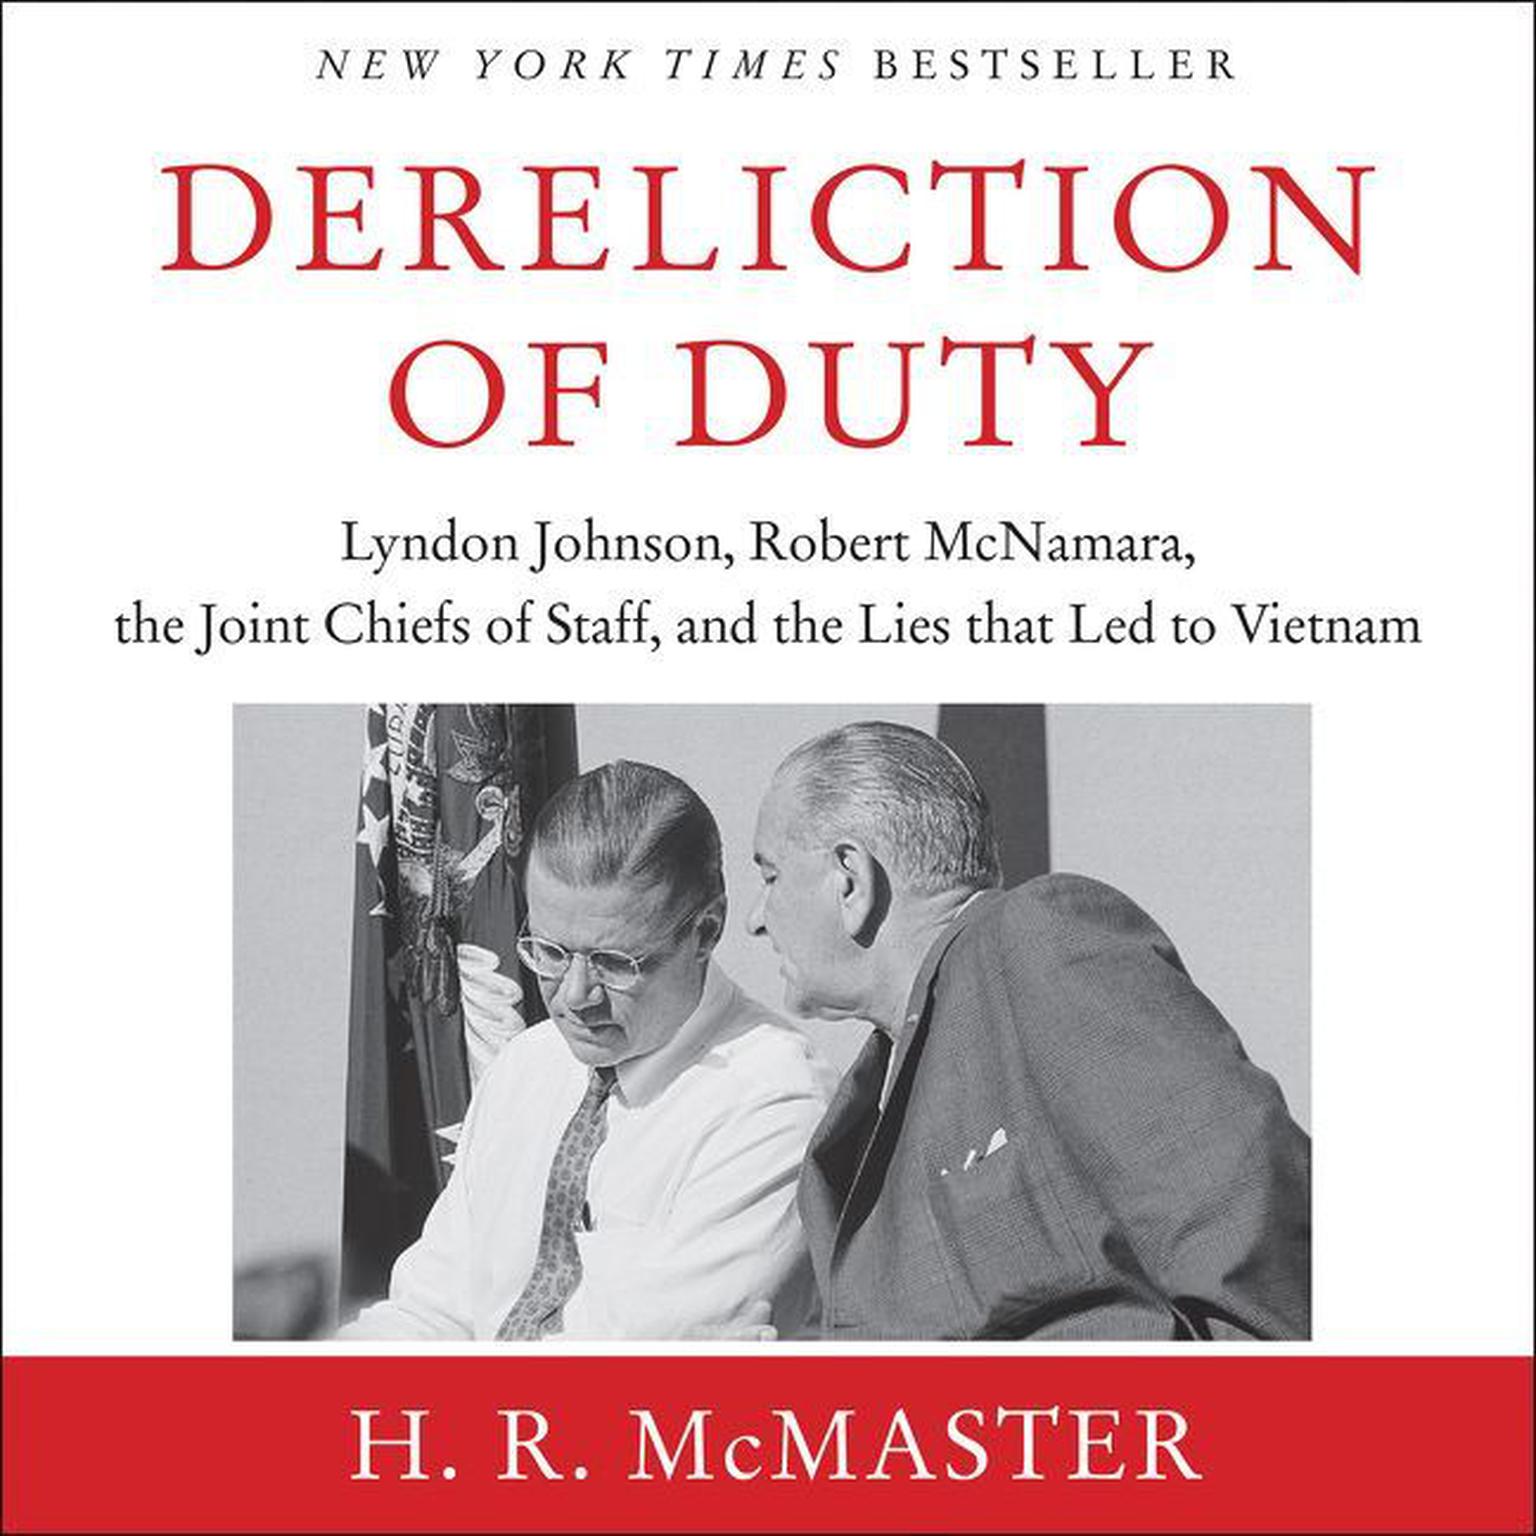 Dereliction of Duty (Abridged): Johnson, McNamara, the Joint Chiefs of Staff, and the Lies That Led to Vietnam Audiobook, by H. R. McMaster